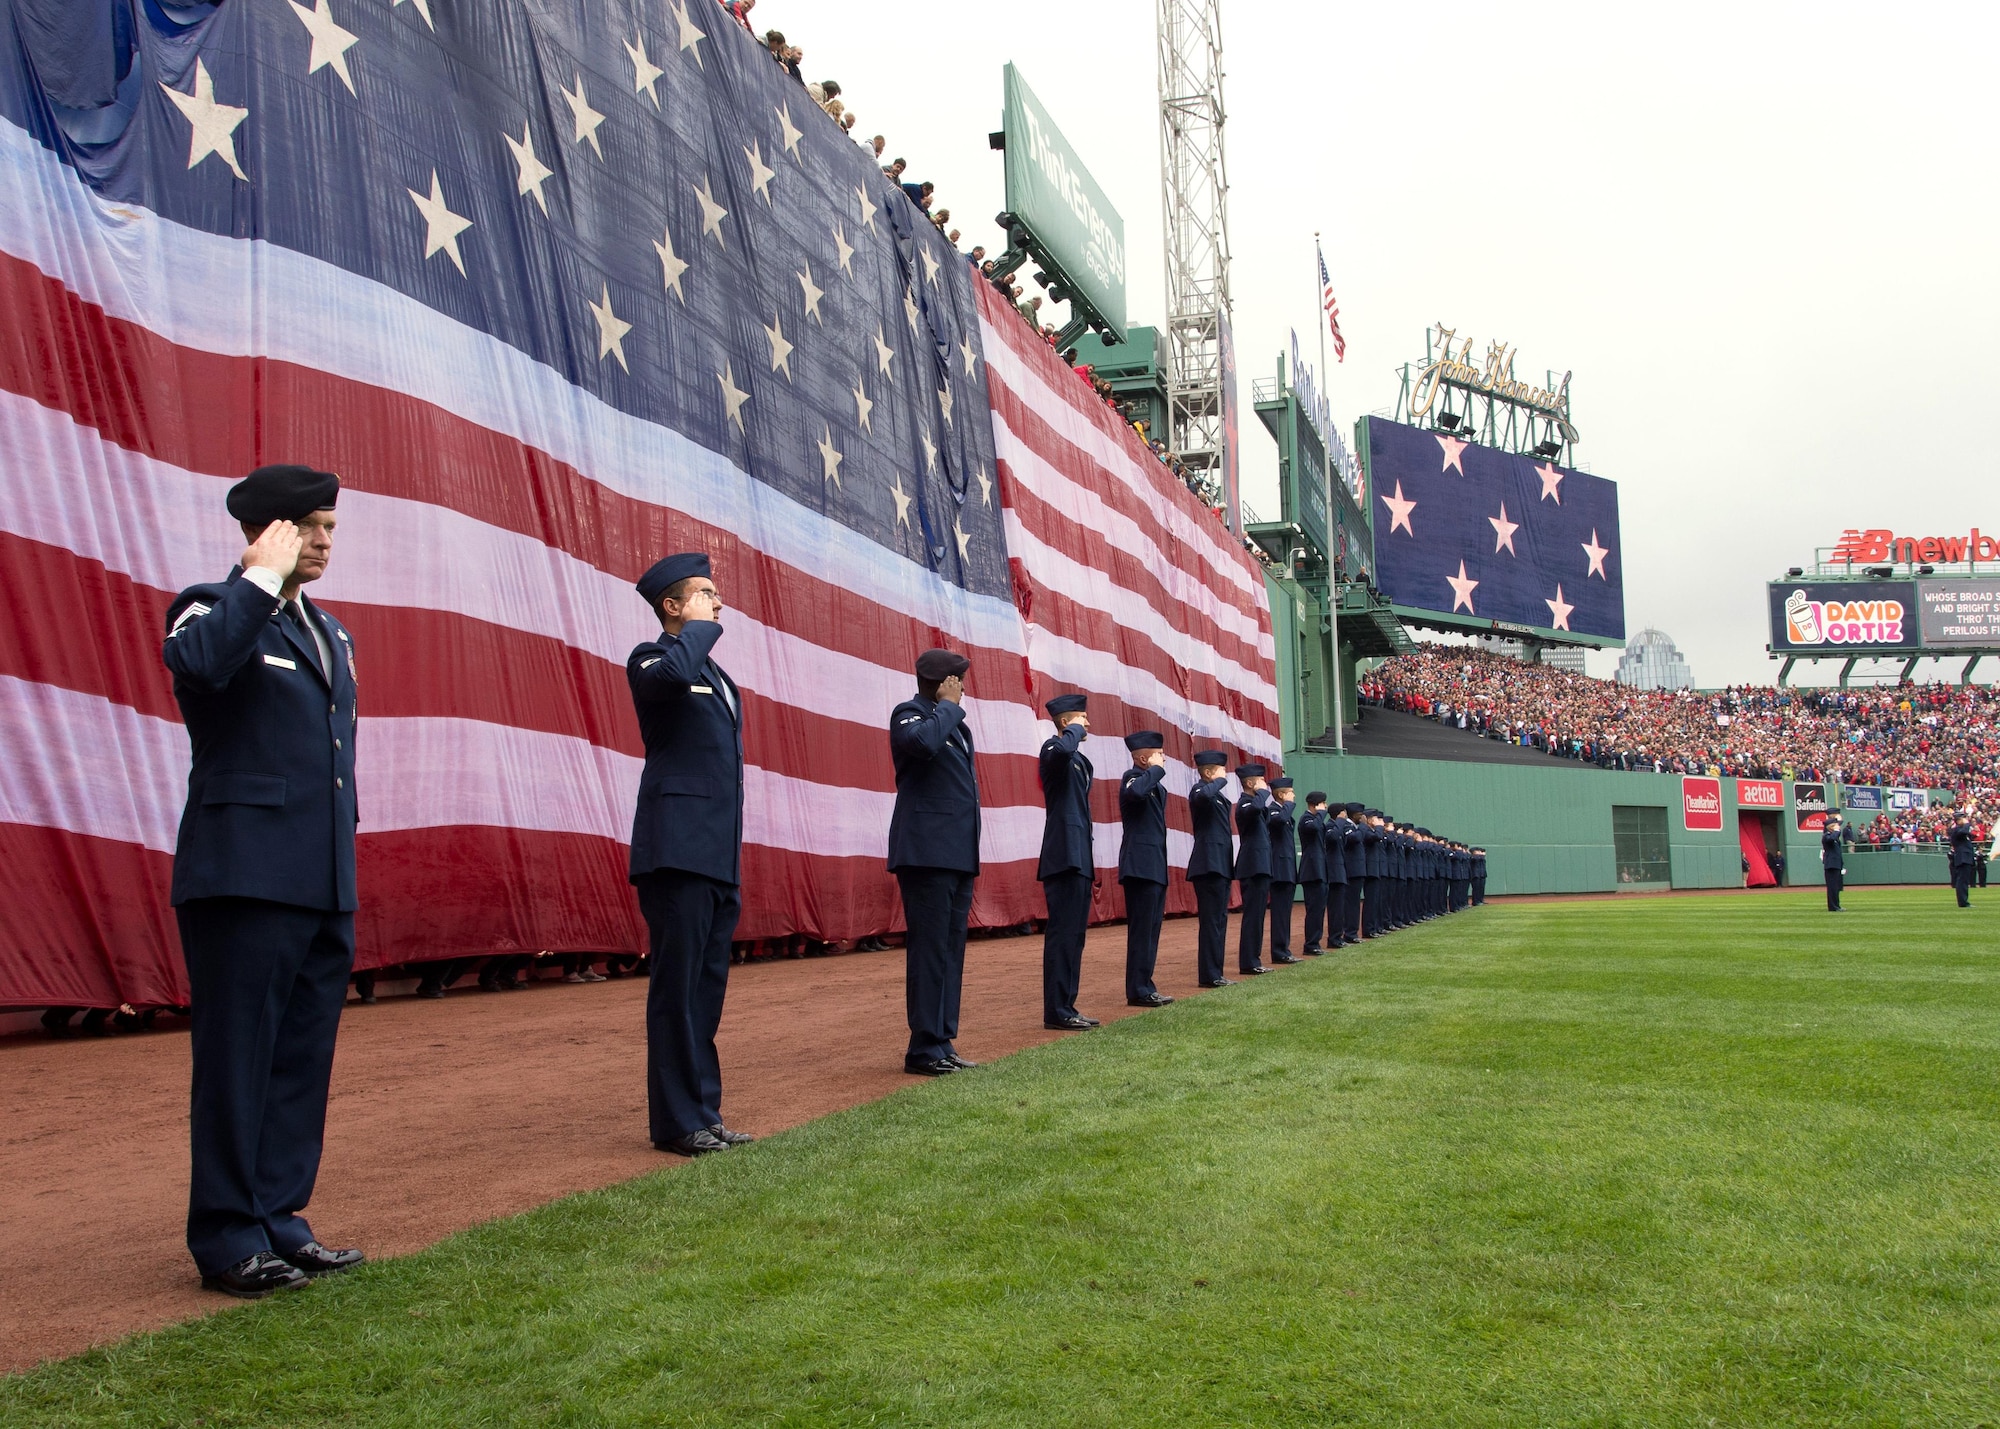 More than 30 Airmen from Hanscom Air Force Base, Mass., salute while the national anthem is played prior to a Boston Red Sox game at Fenway Park Oct. 2. Airmen participated in the flag detail as part of pregame festivities during the team's final regular season game. (U.S. Air Force photo by Mark Herlihy) 